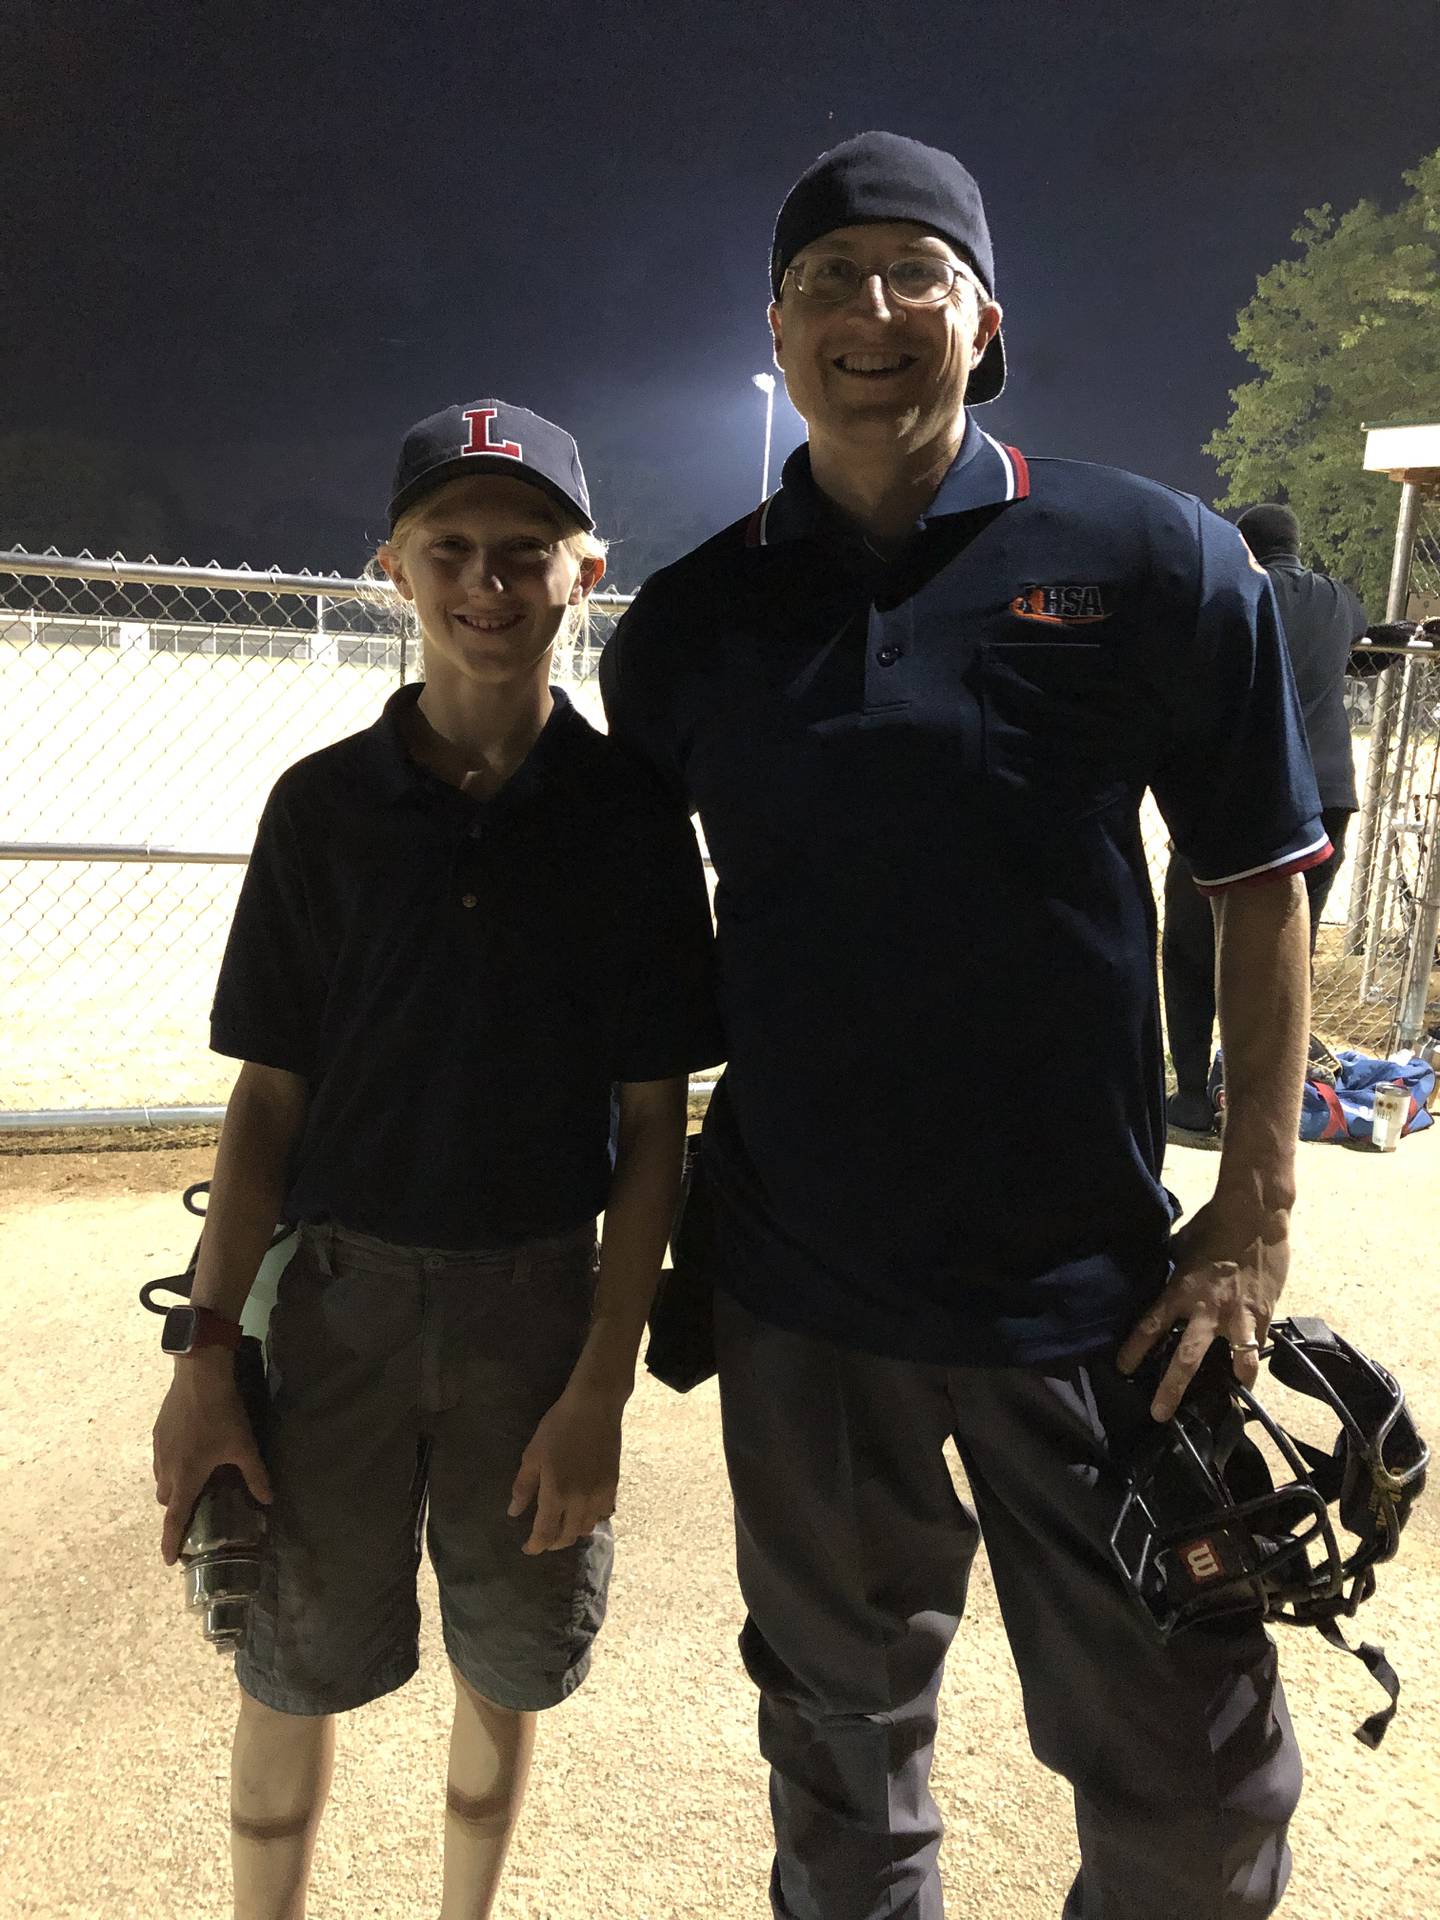 Scott T. Holland and his son Max, 15, prepare to team up as umpires for a ball game.